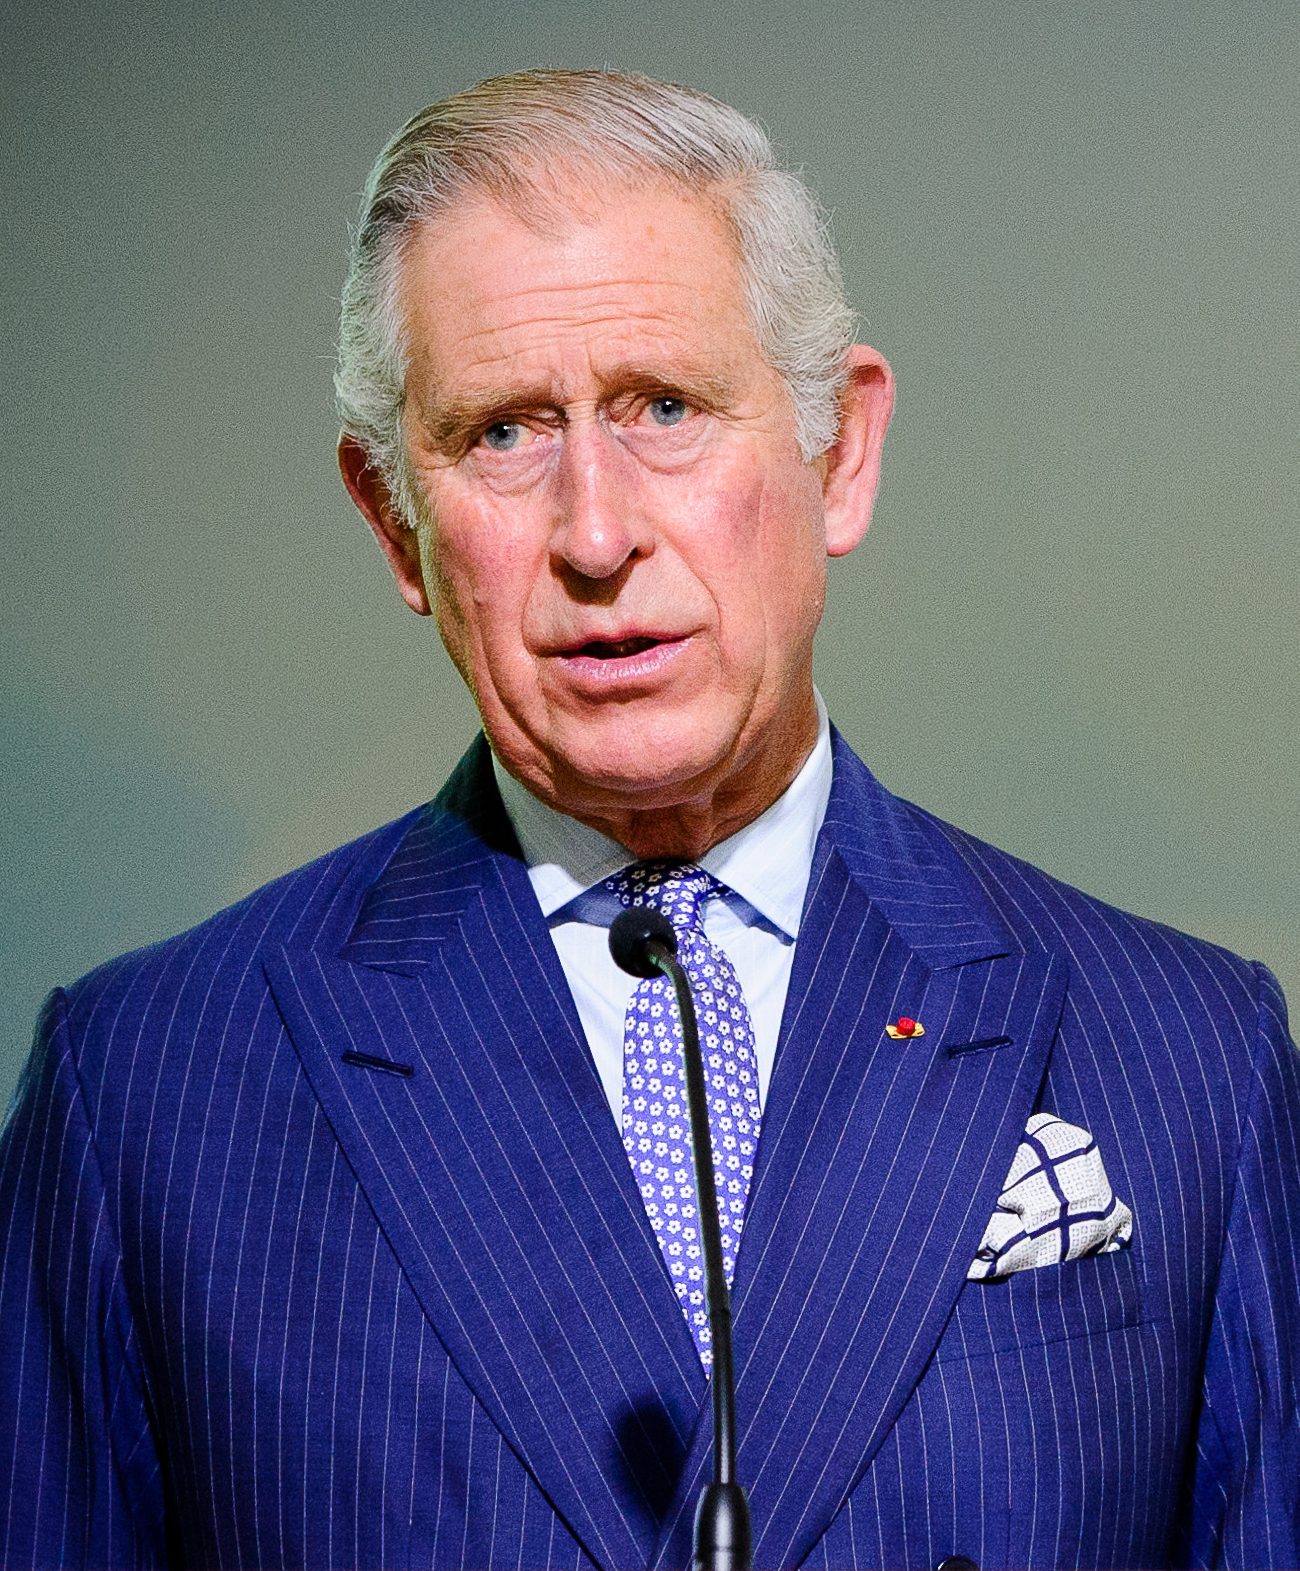 Prince Charles Upsetting Mother Queen Elizabeth With Big Plans For Buckingham Palace!